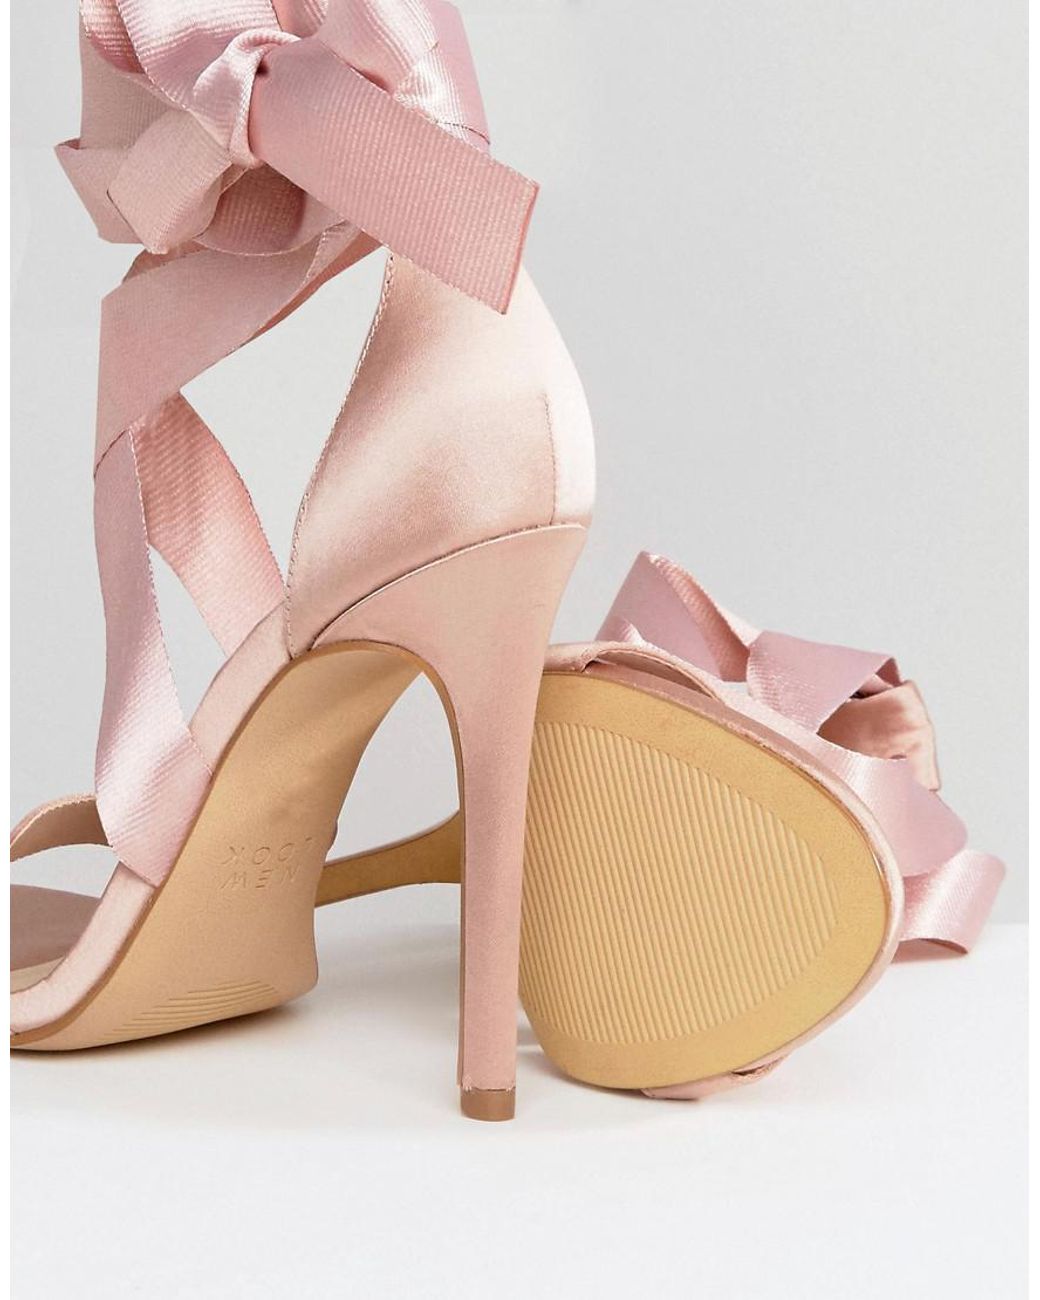 DOLCE VITA by JUST-ENE - Pointed-toe pumps with crossed straps in nude/pink  tones - Just-ENE